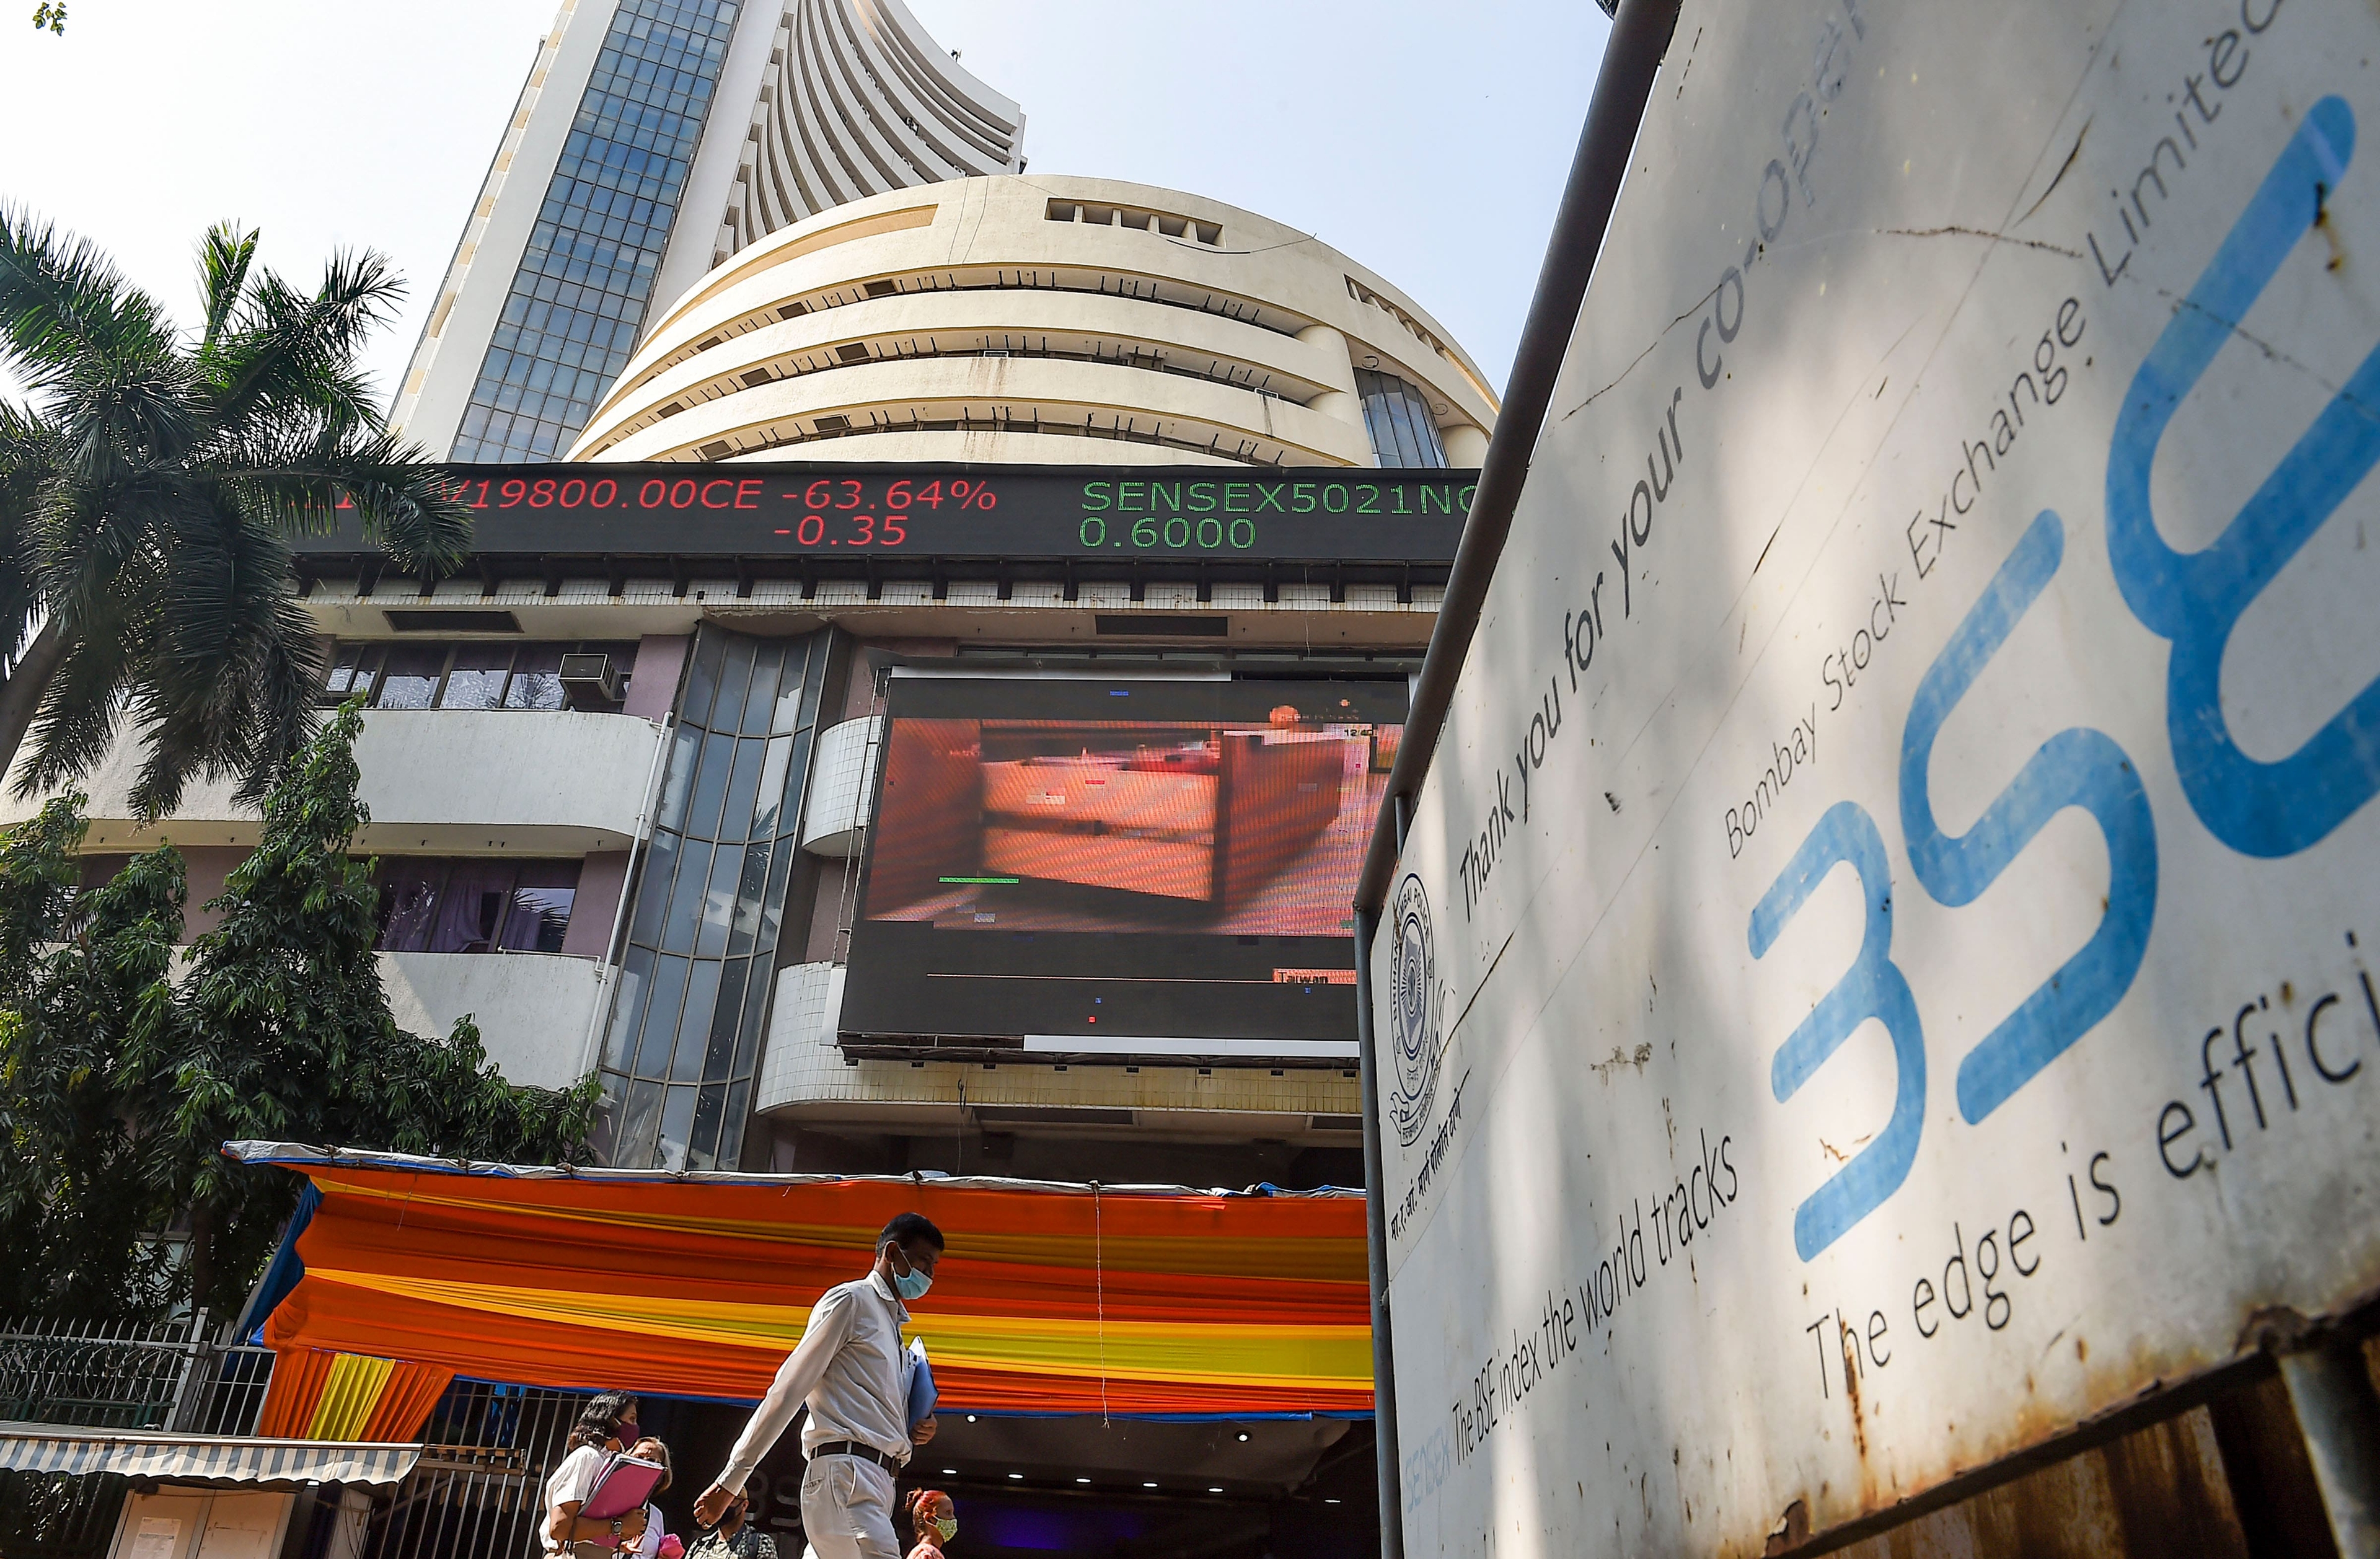 On Monday, the 30-share pack Sensex ended 483 points, or 0.81 percent, lower at 58,964.57 with 23 stocks in the red. Nifty ended 109 points, or 0.62 percent, lower at 17,674.95.